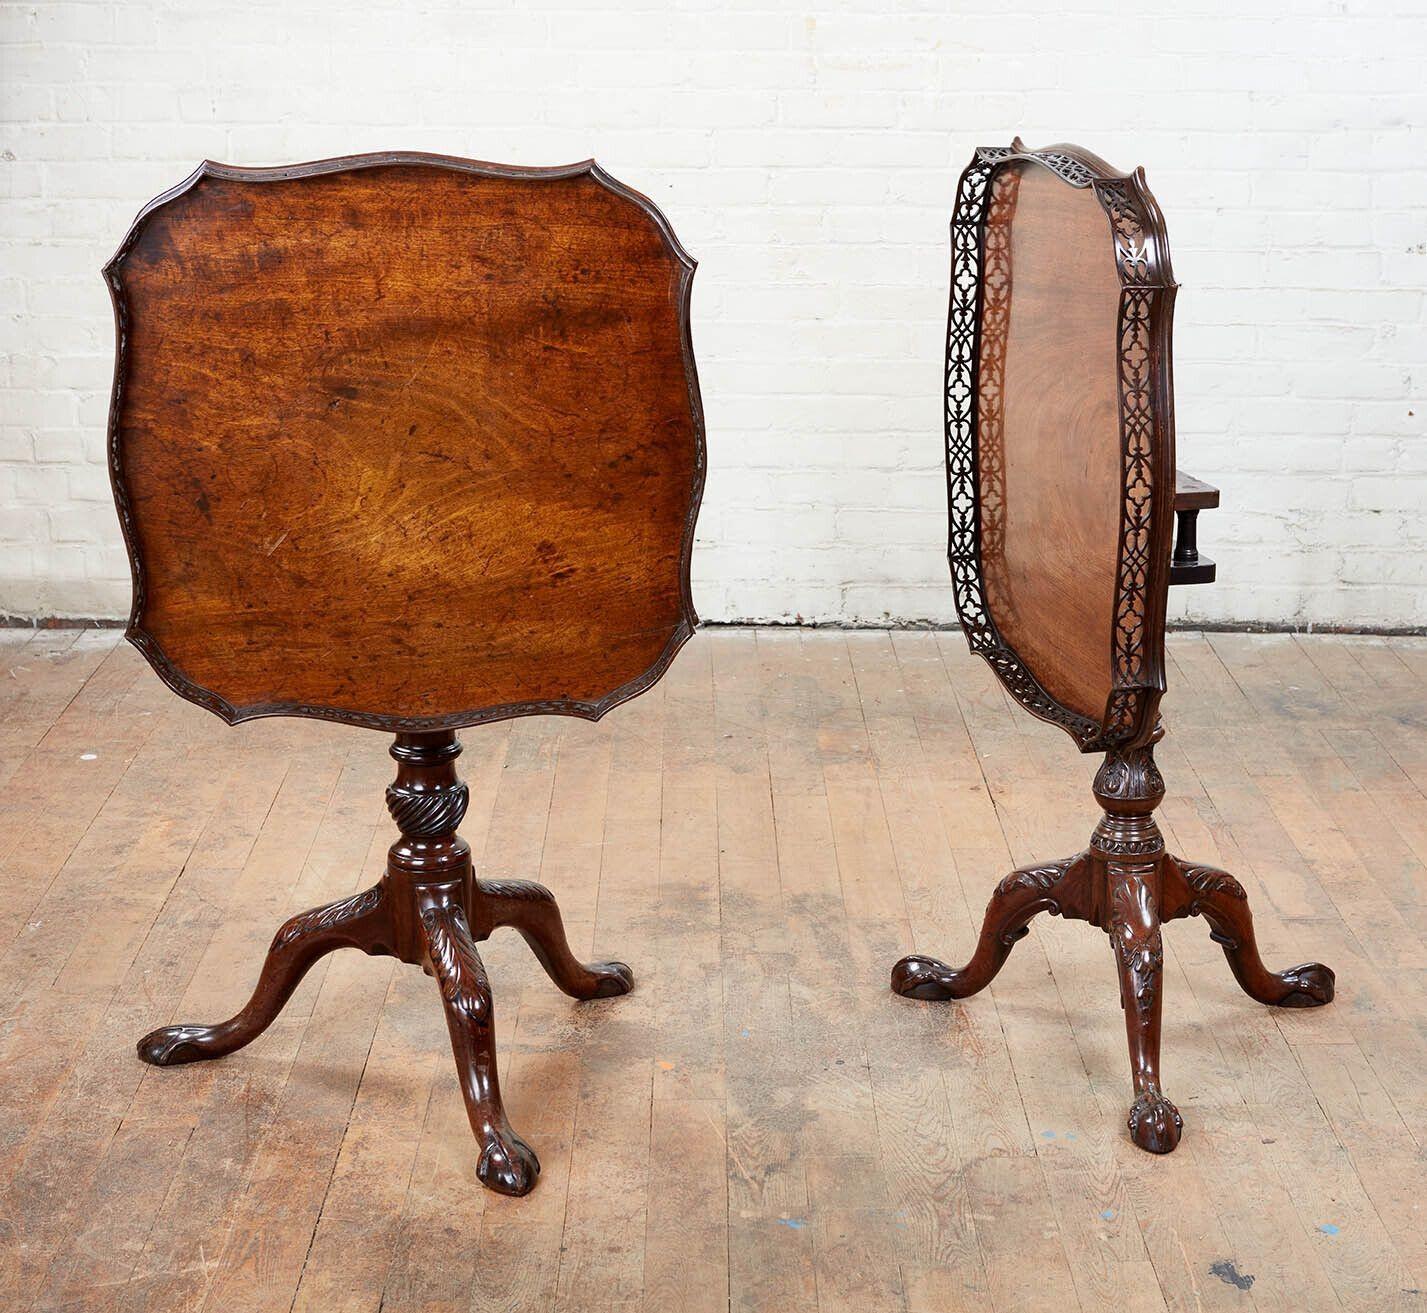 Very fine near pair of George II period padouk fretwork gallery tea tables, the pierced laminated galleries with trellis designs over shaped single board tops, each with birdcage mechanisms and standing on carved tripod bases: one with baluster stem